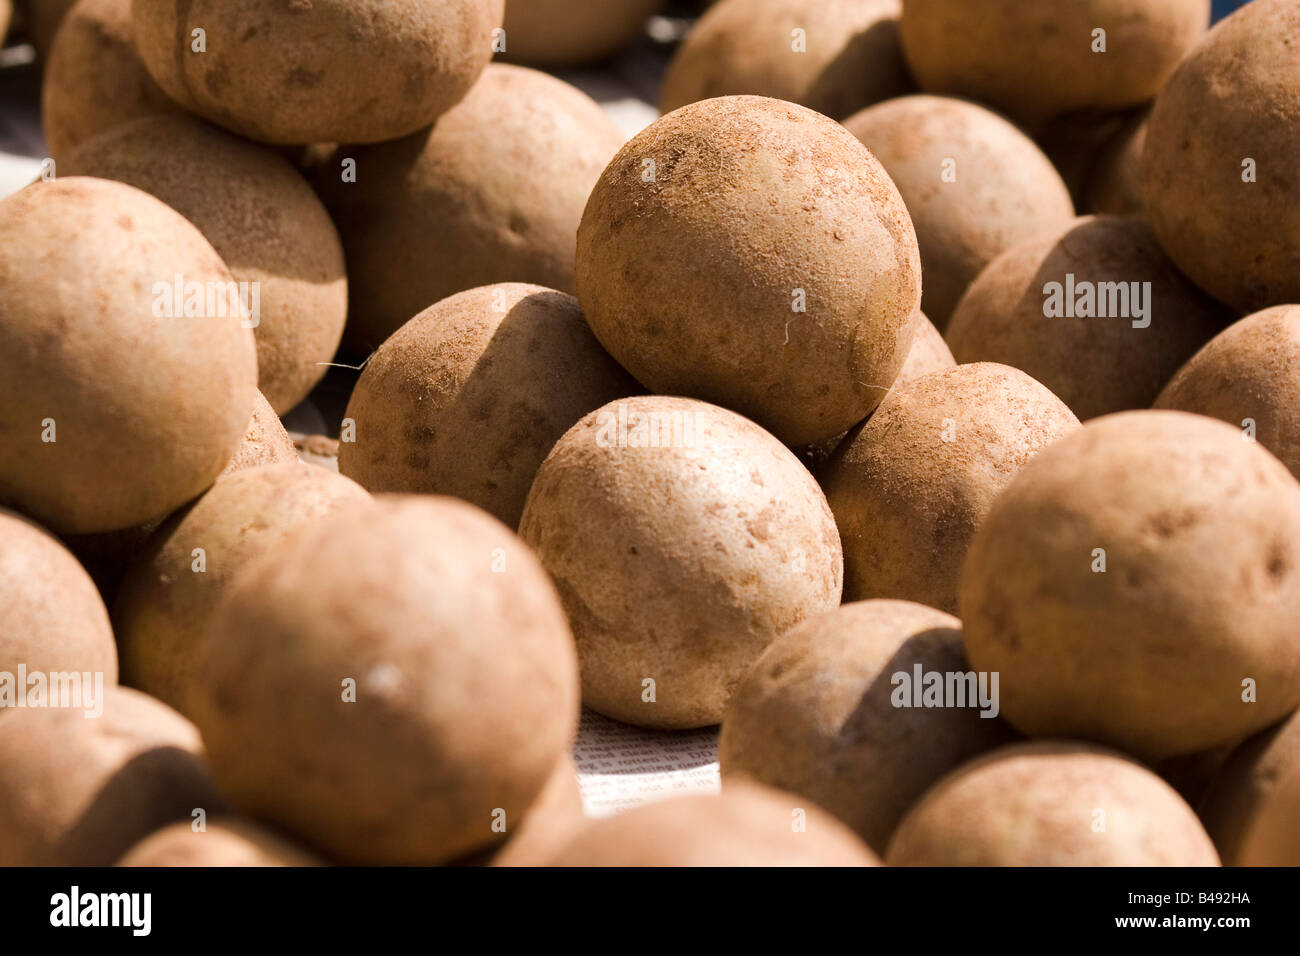 Sapodilla (a.k.a. Chikku and Sapota) a popular fruit, is sold at a market in south India. Stock Photo